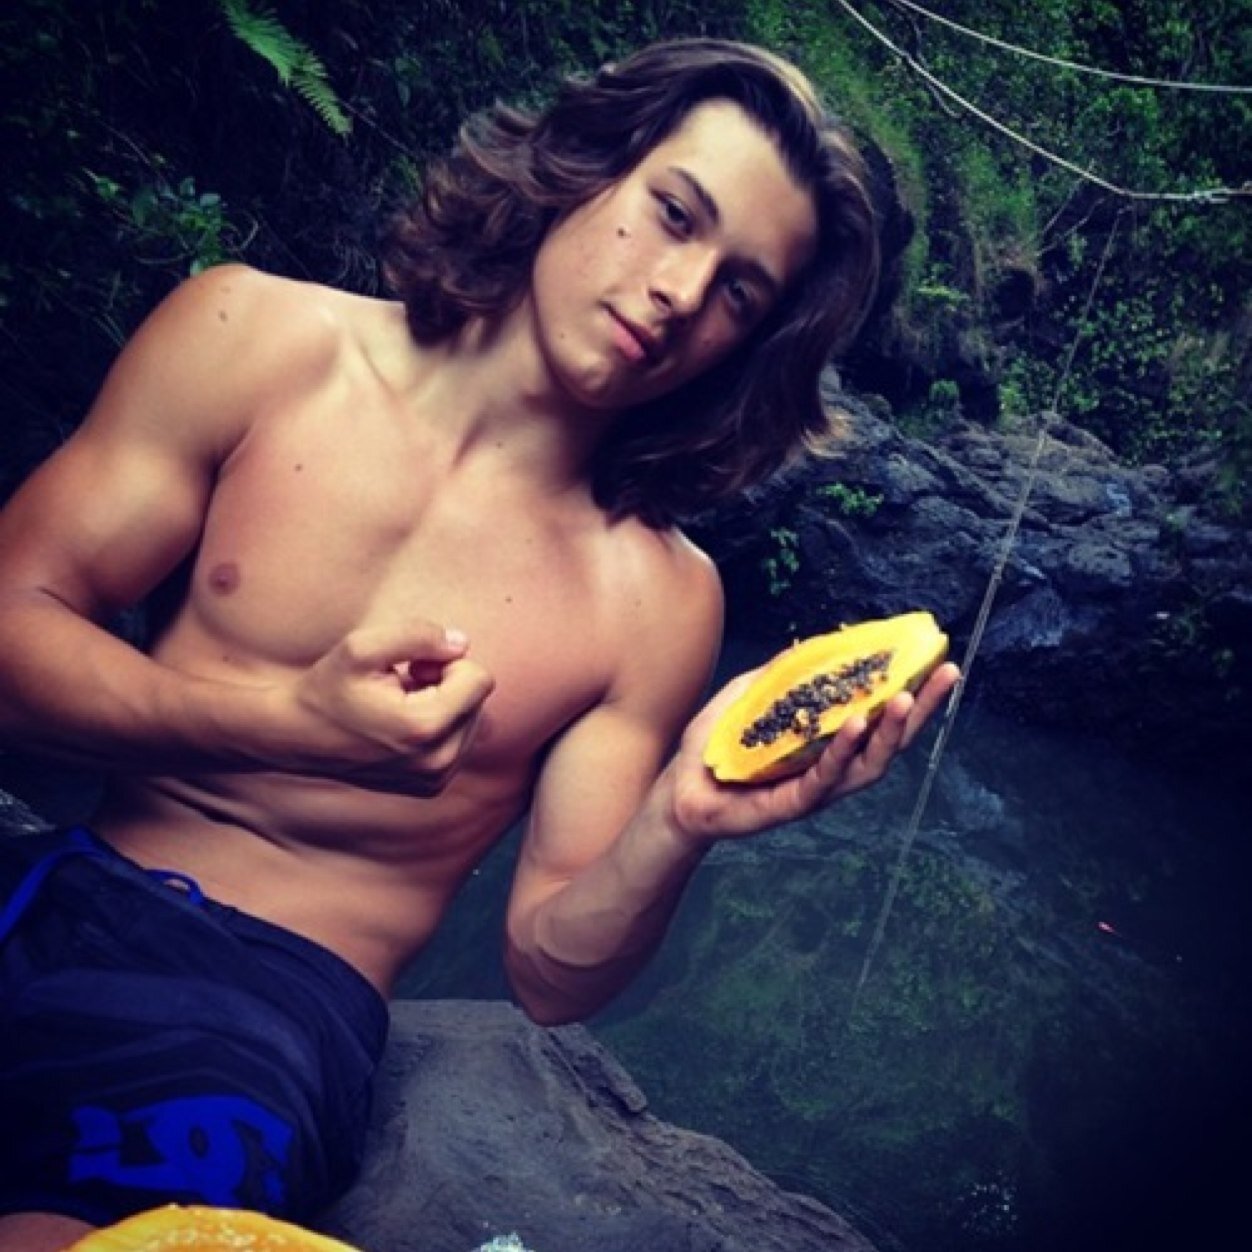 You have to know just One Thing about me which is I Love Leo Howard !!!! I Can't Describe My Love To Him In 160 Letters !!!